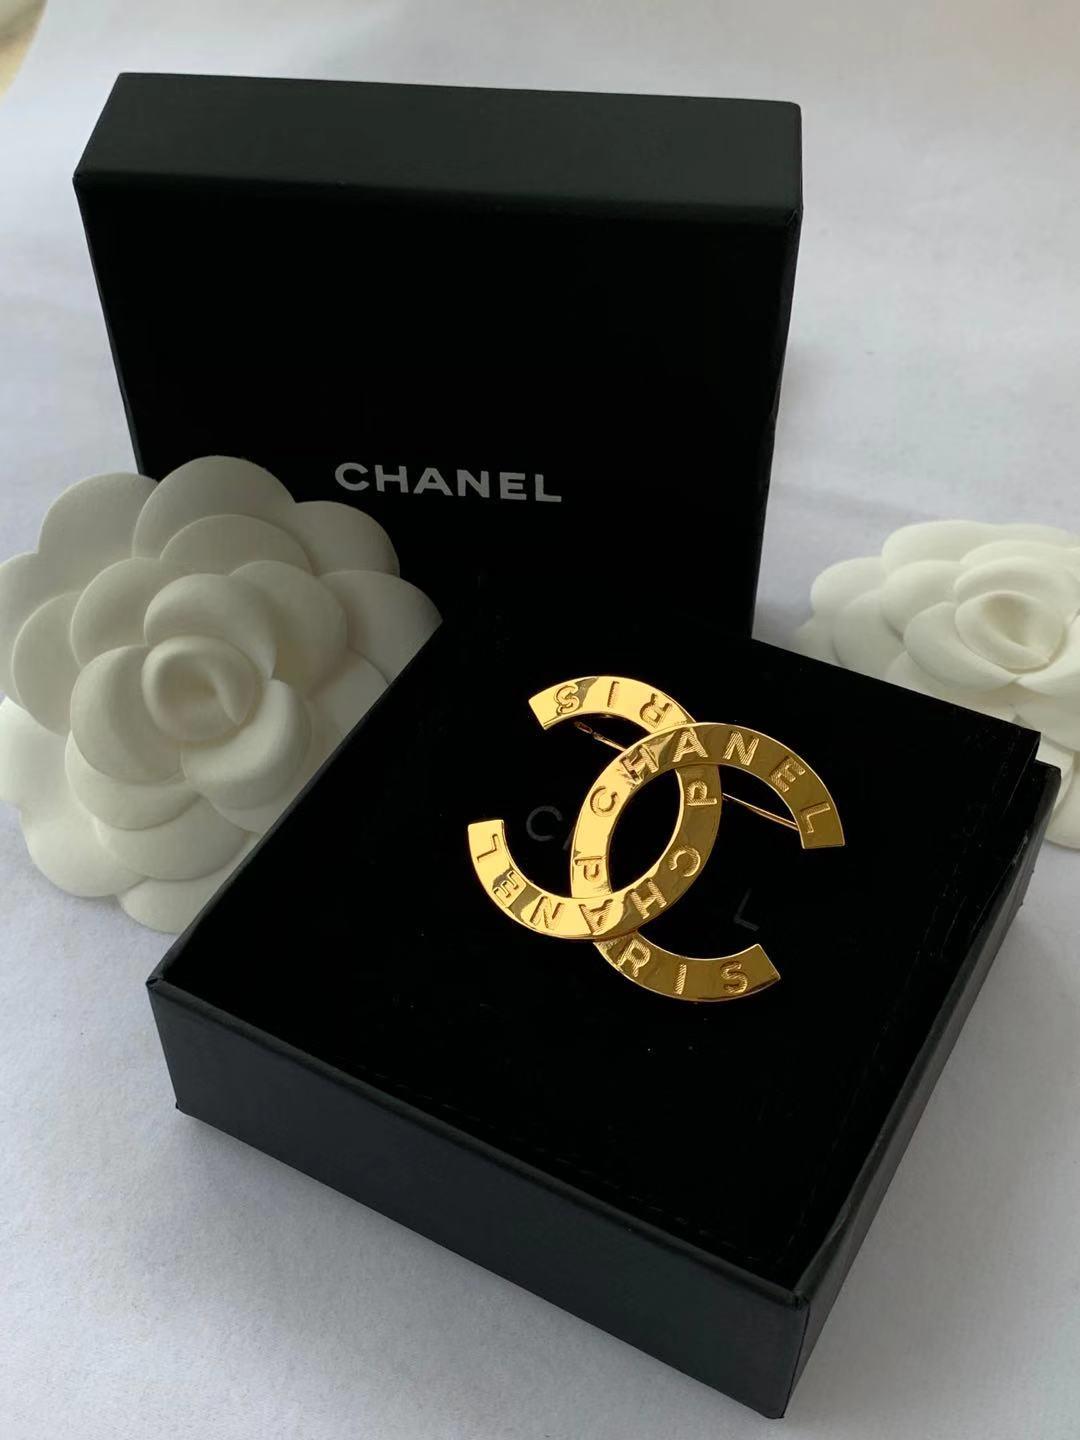 This distinctive and luxurious pin brooch by Chanel is the best accessory for any of your elegant eveningwear ensembles. Gold-coloured CC brooch with Chanel engraved on the C’s, this brooch will elegantly sit on your lapels and blouses.

This